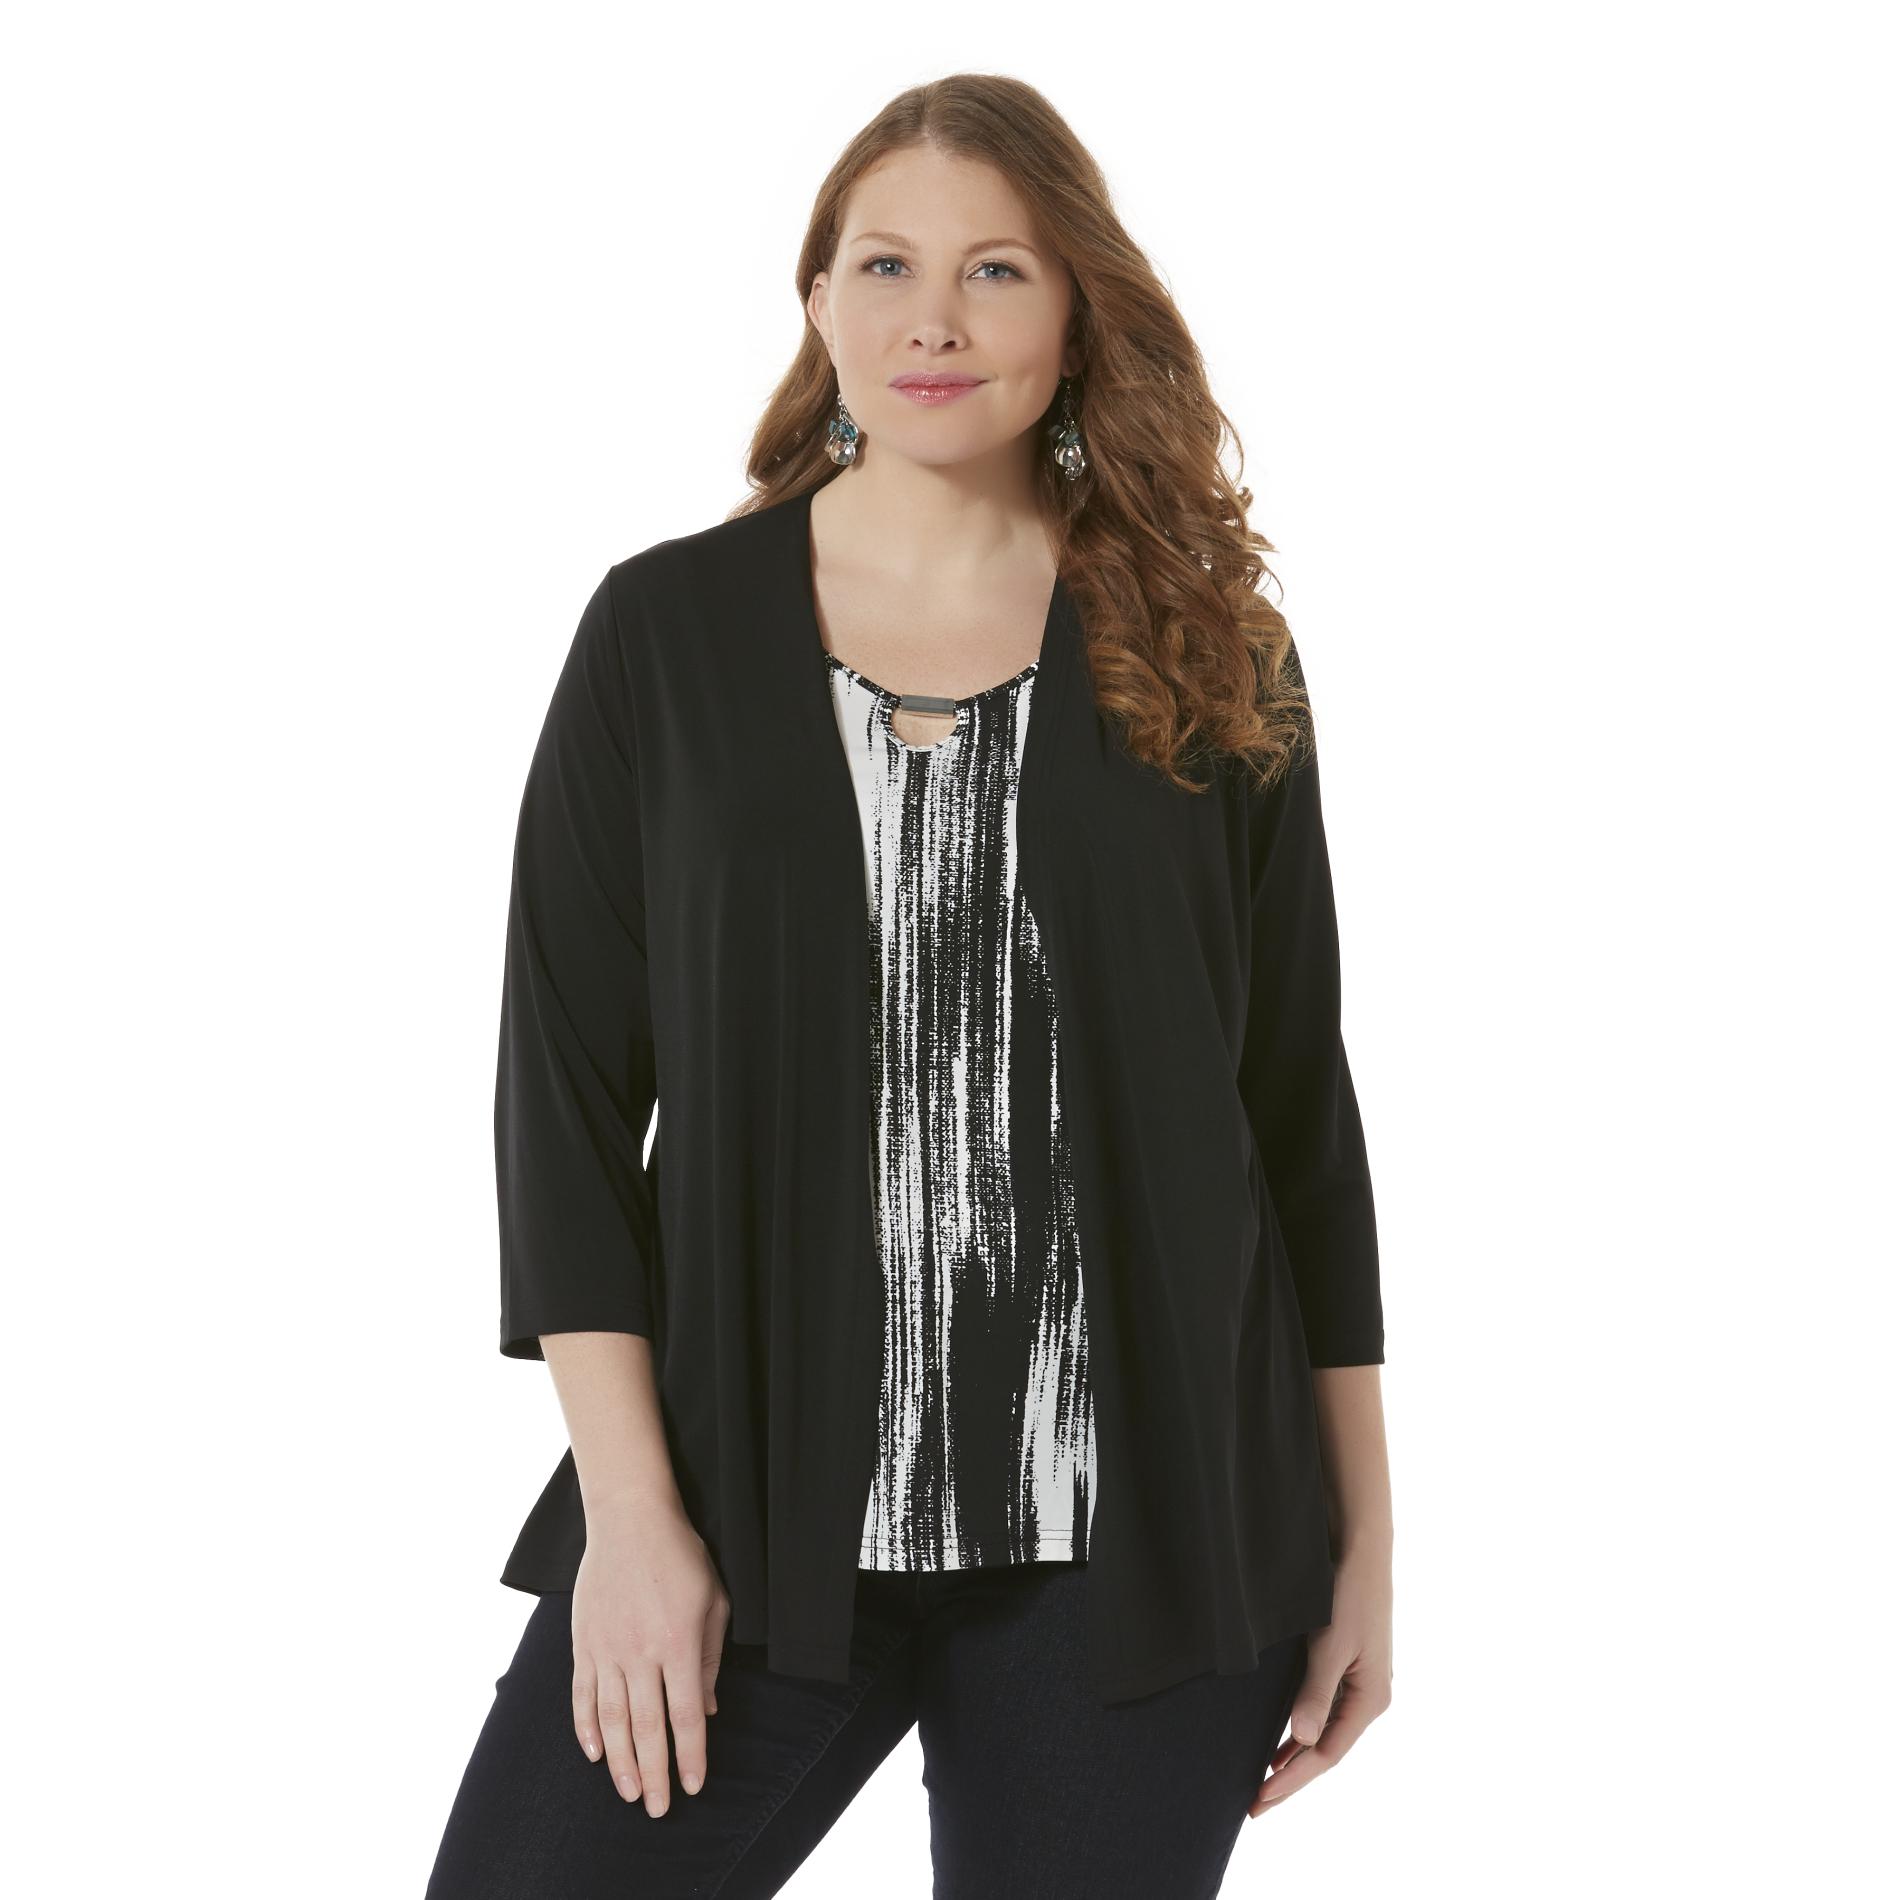 Jaclyn Smith Women's Plus Layered-Look Top - Abstract Print - Kmart